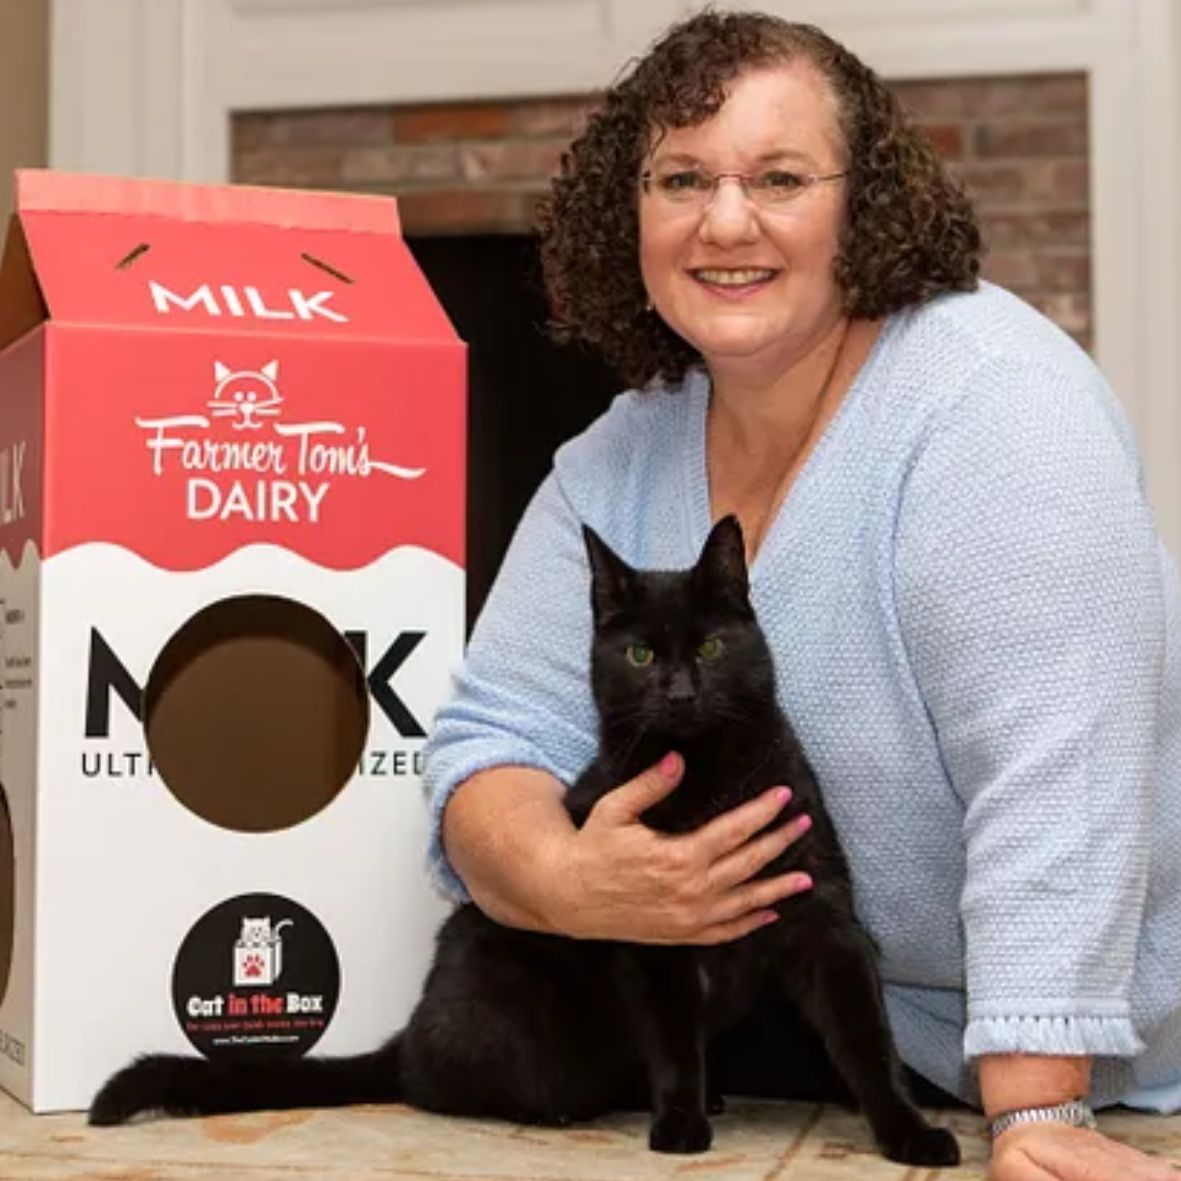 Pets and Mental Wellness: Dawn LaFontaine Of Cat in the Box On How to Maximize the Mental Health Benefits of Having a Pet